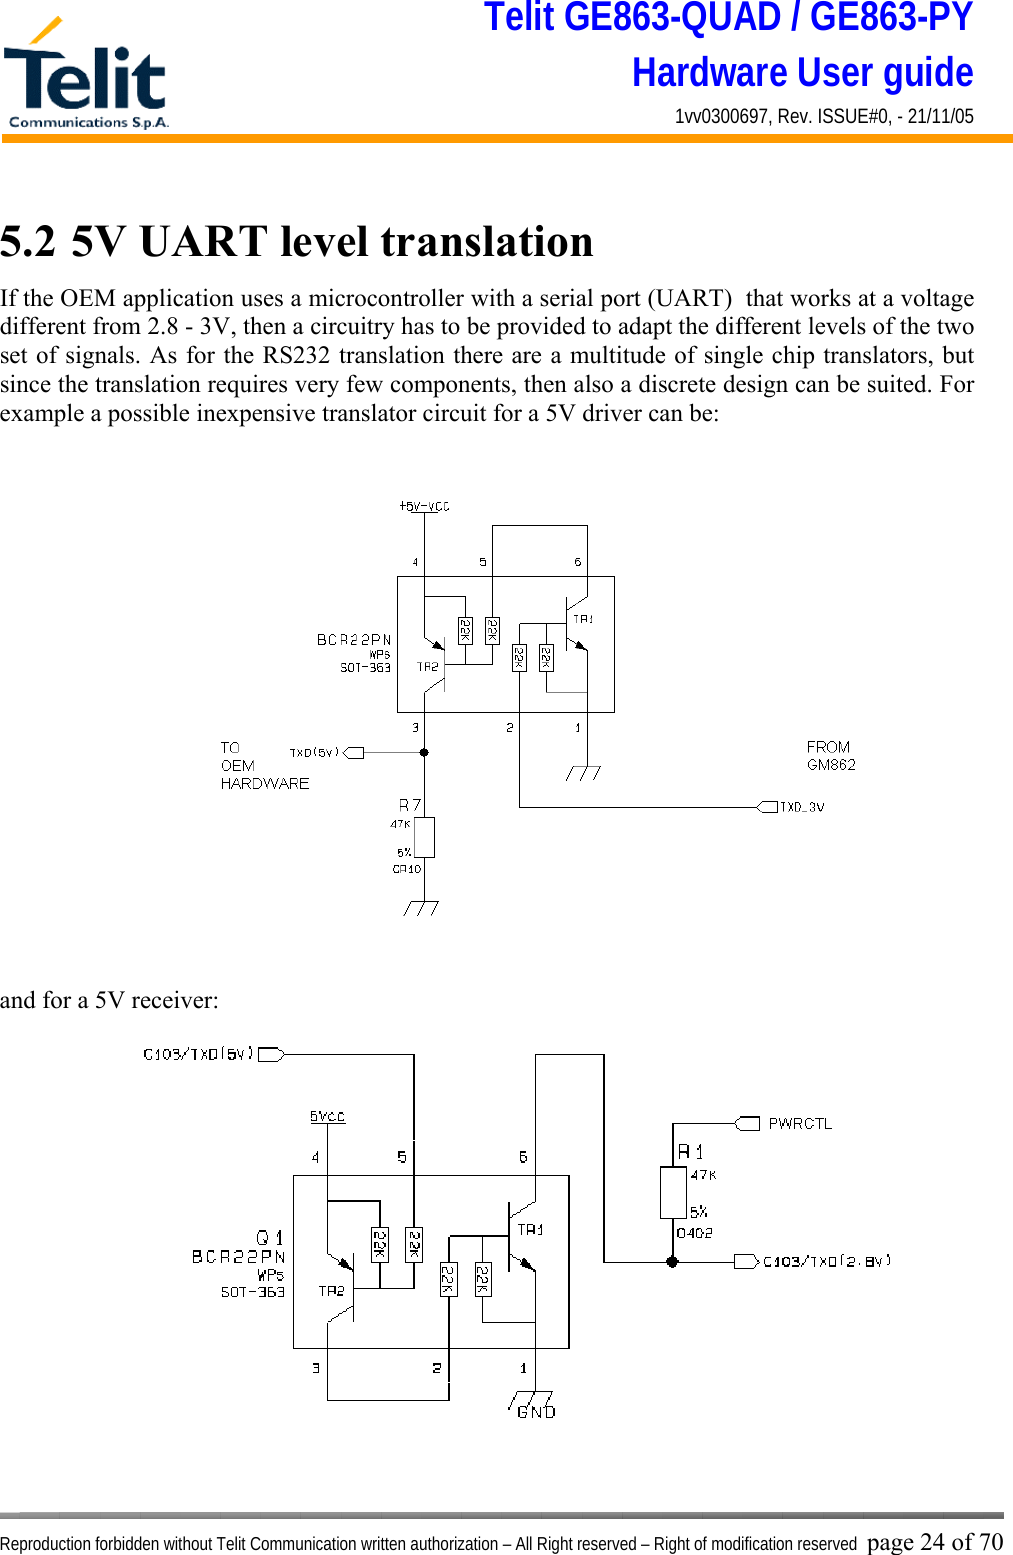 Telit GE863-QUAD / GE863-PY Hardware User guide 1vv0300697, Rev. ISSUE#0, - 21/11/05    Reproduction forbidden without Telit Communication written authorization – All Right reserved – Right of modification reserved page 24 of 70 5.2  5V UART level translation If the OEM application uses a microcontroller with a serial port (UART)  that works at a voltage different from 2.8 - 3V, then a circuitry has to be provided to adapt the different levels of the two set of signals. As for the RS232 translation there are a multitude of single chip translators, but since the translation requires very few components, then also a discrete design can be suited. For example a possible inexpensive translator circuit for a 5V driver can be:   and for a 5V receiver:  